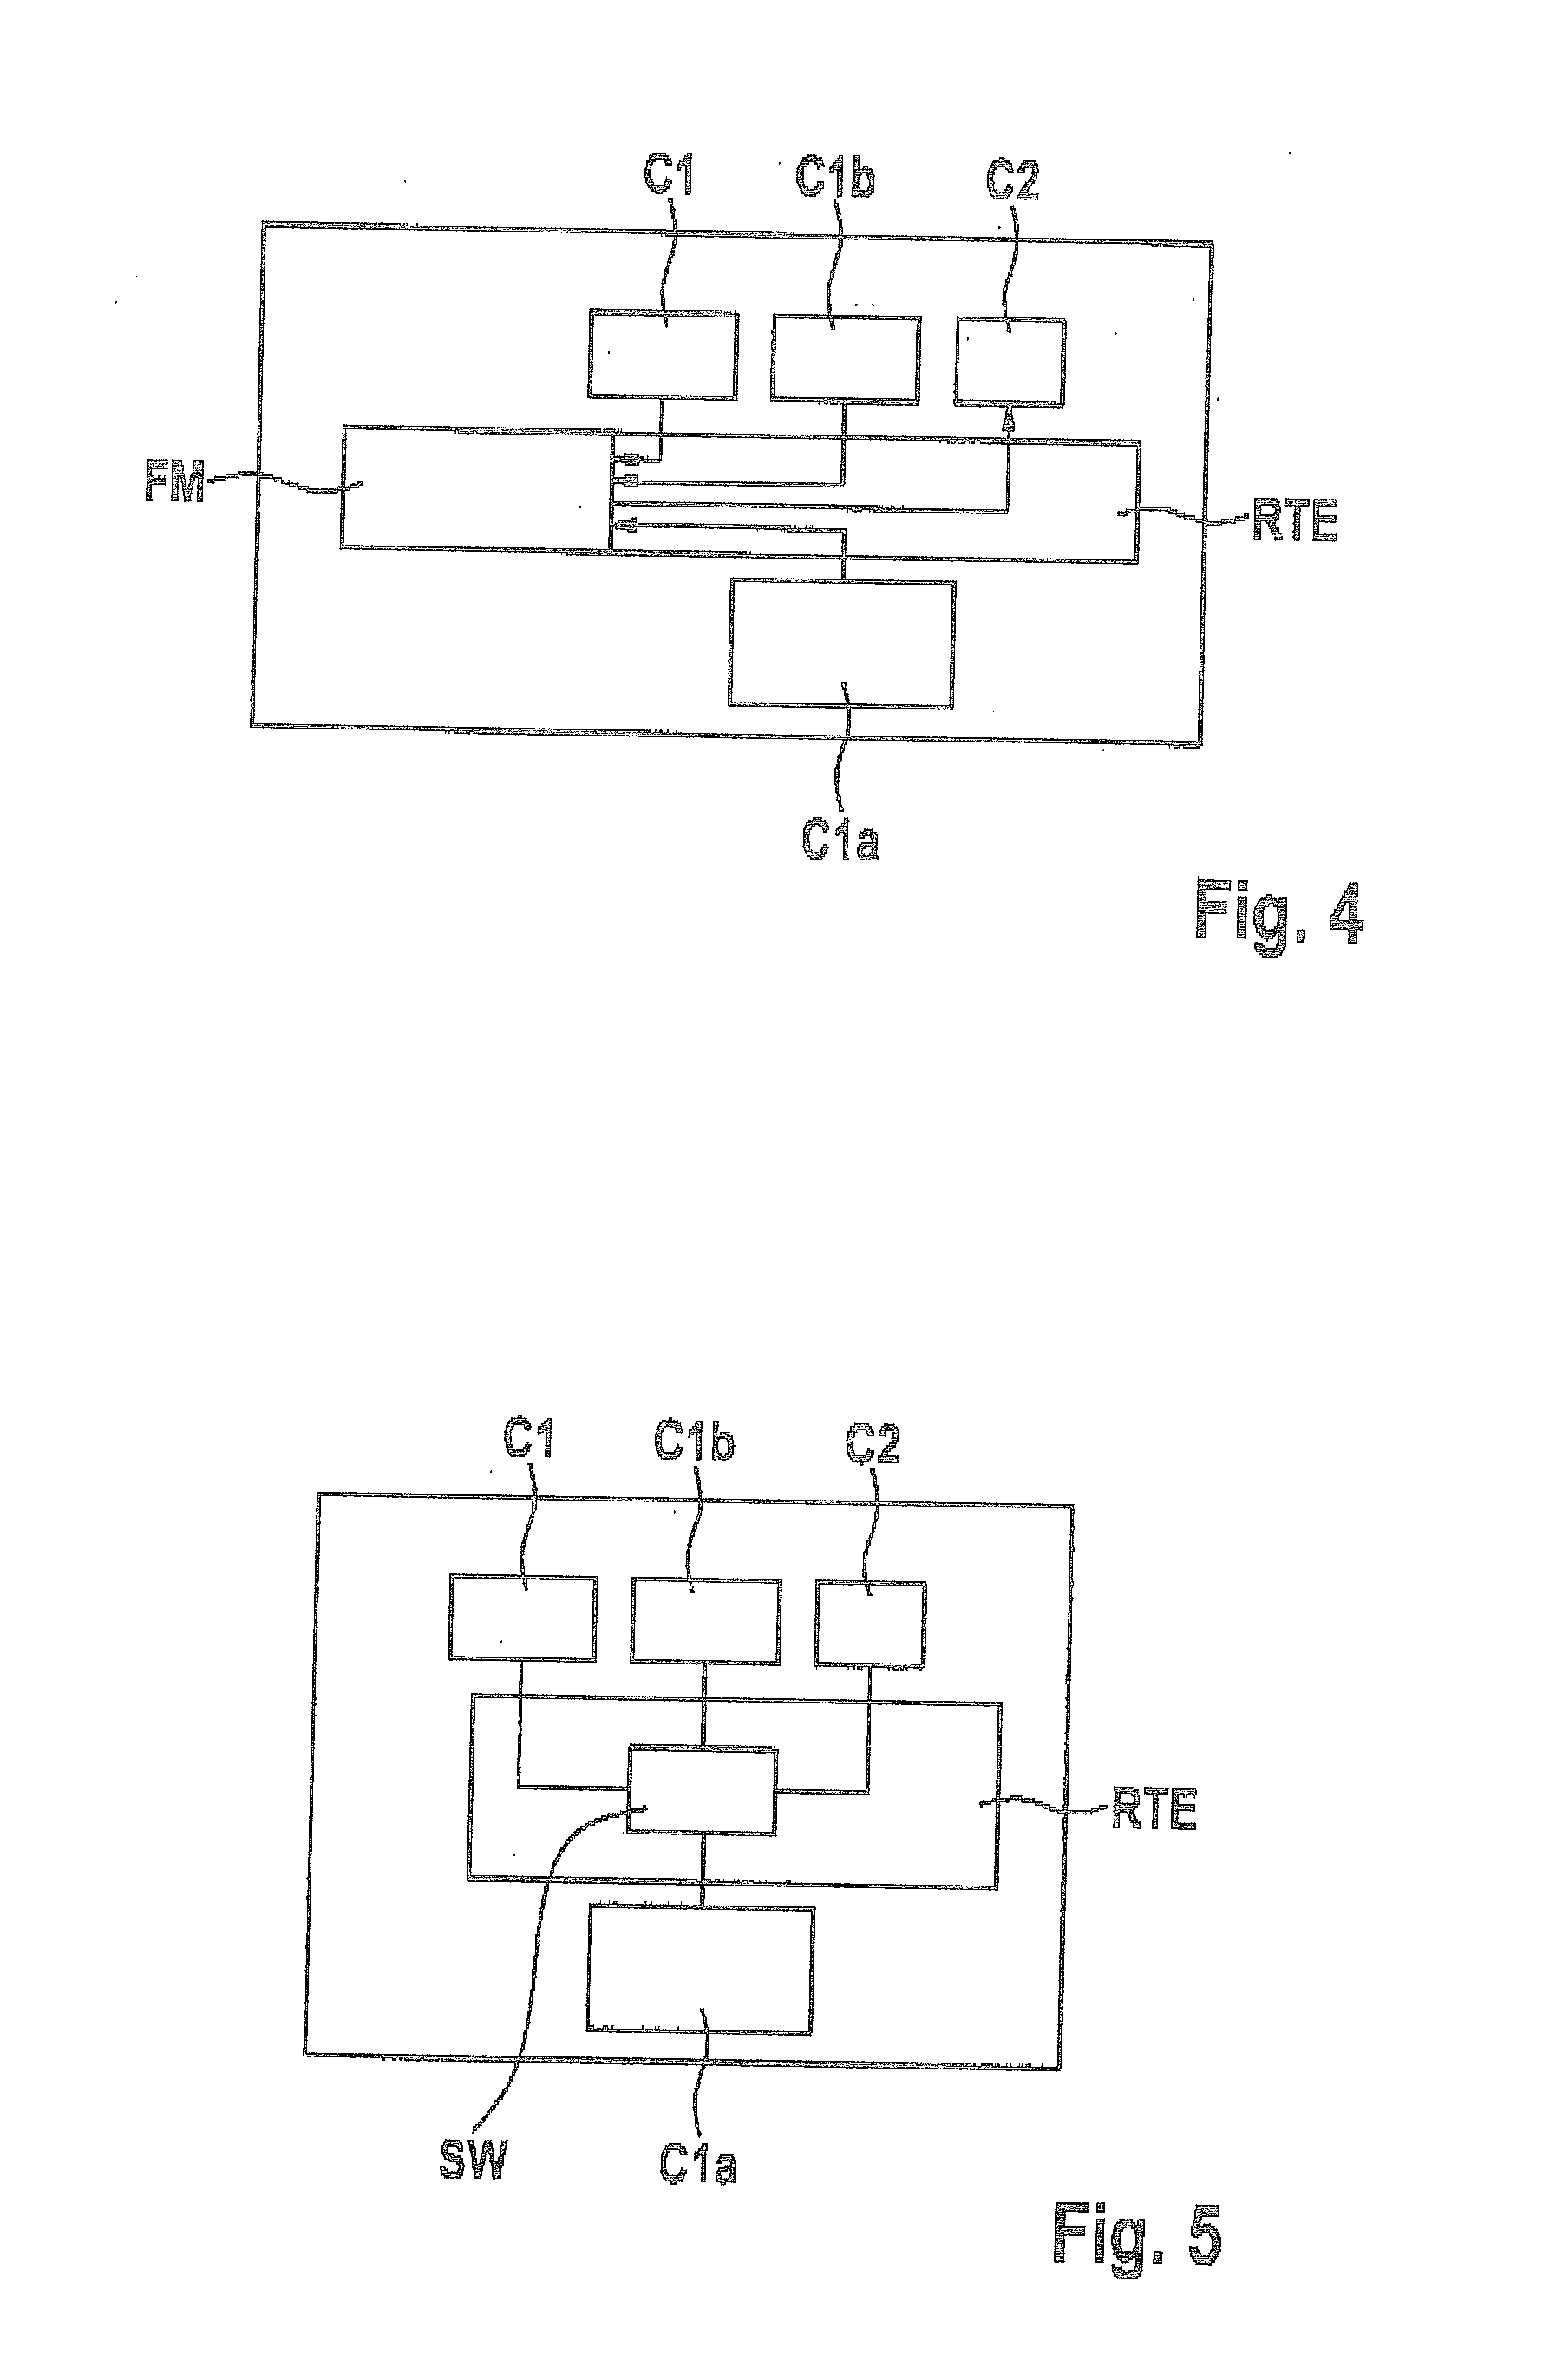 Method of bypassing an autosar software component of an autosar software system